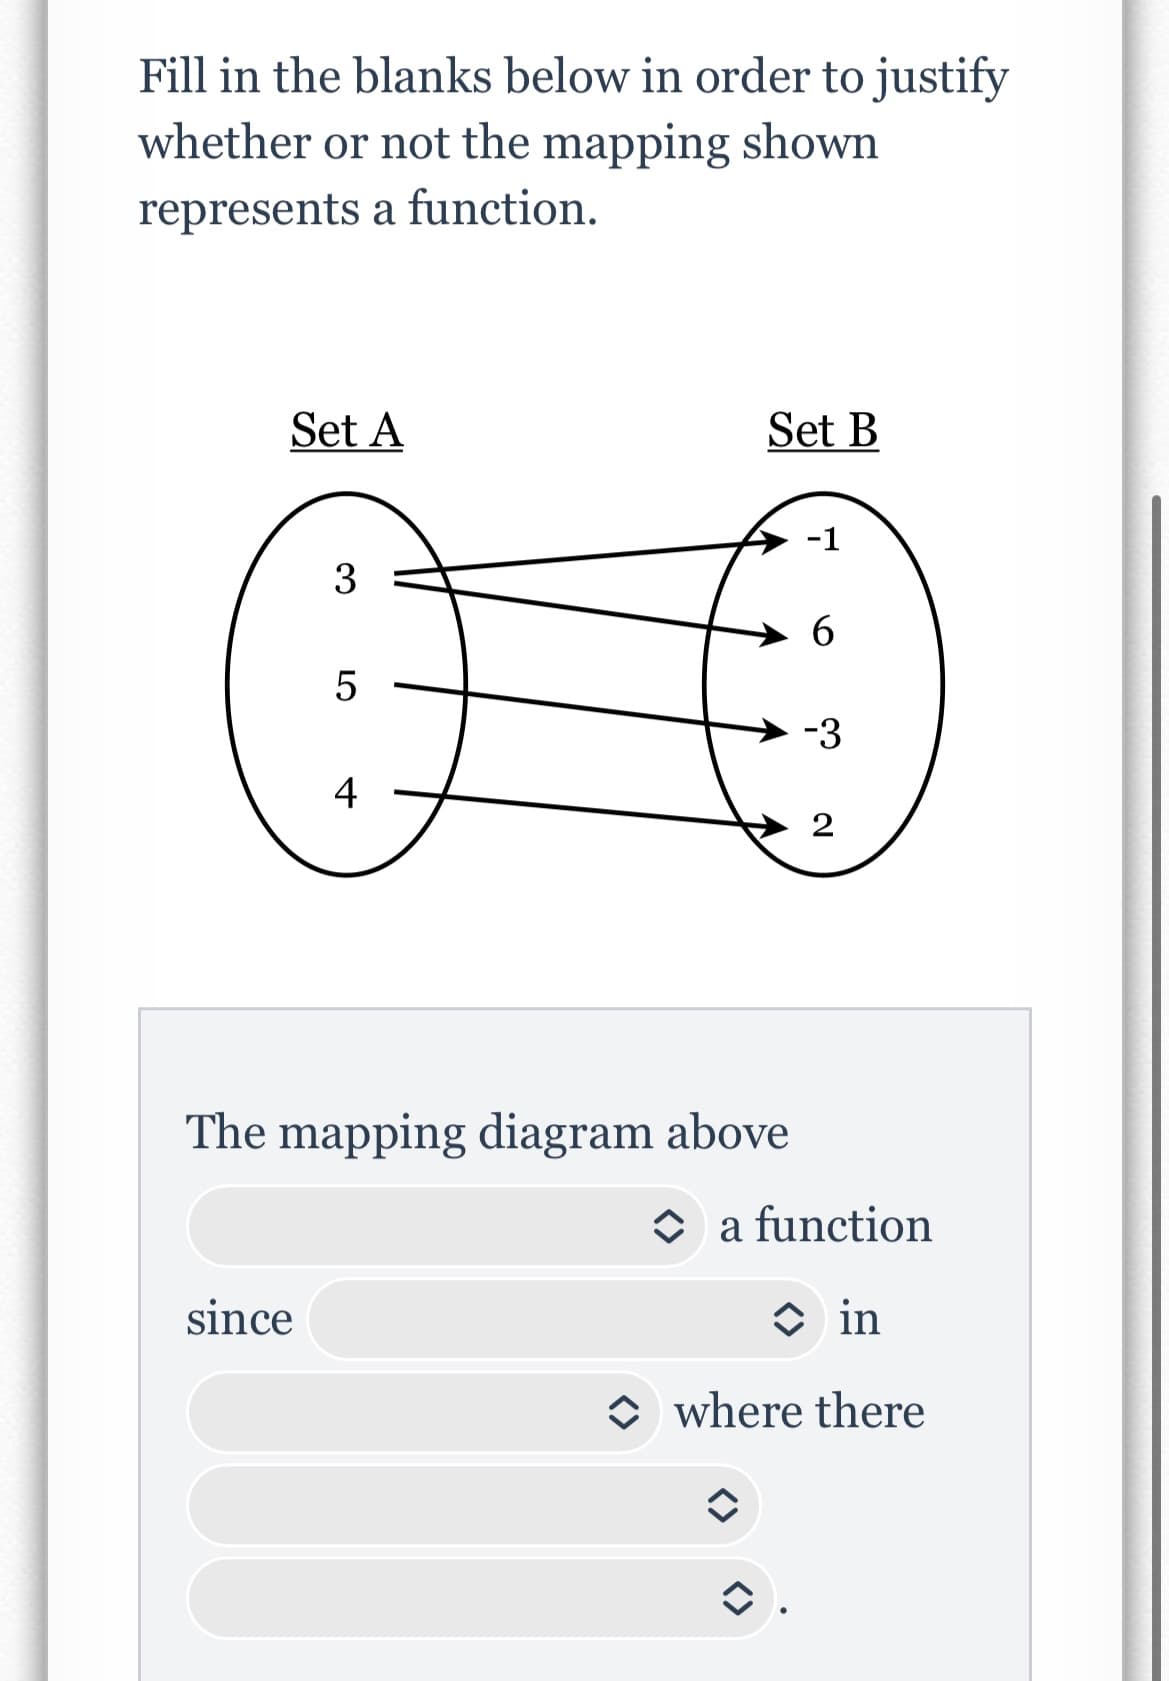 Fill in the blanks below in order to justify
whether or not the mapping shown
represents a function.
Set A
3
since
5
Set B
The mapping diagram above
-1
6
-3
2
a function
in
where there